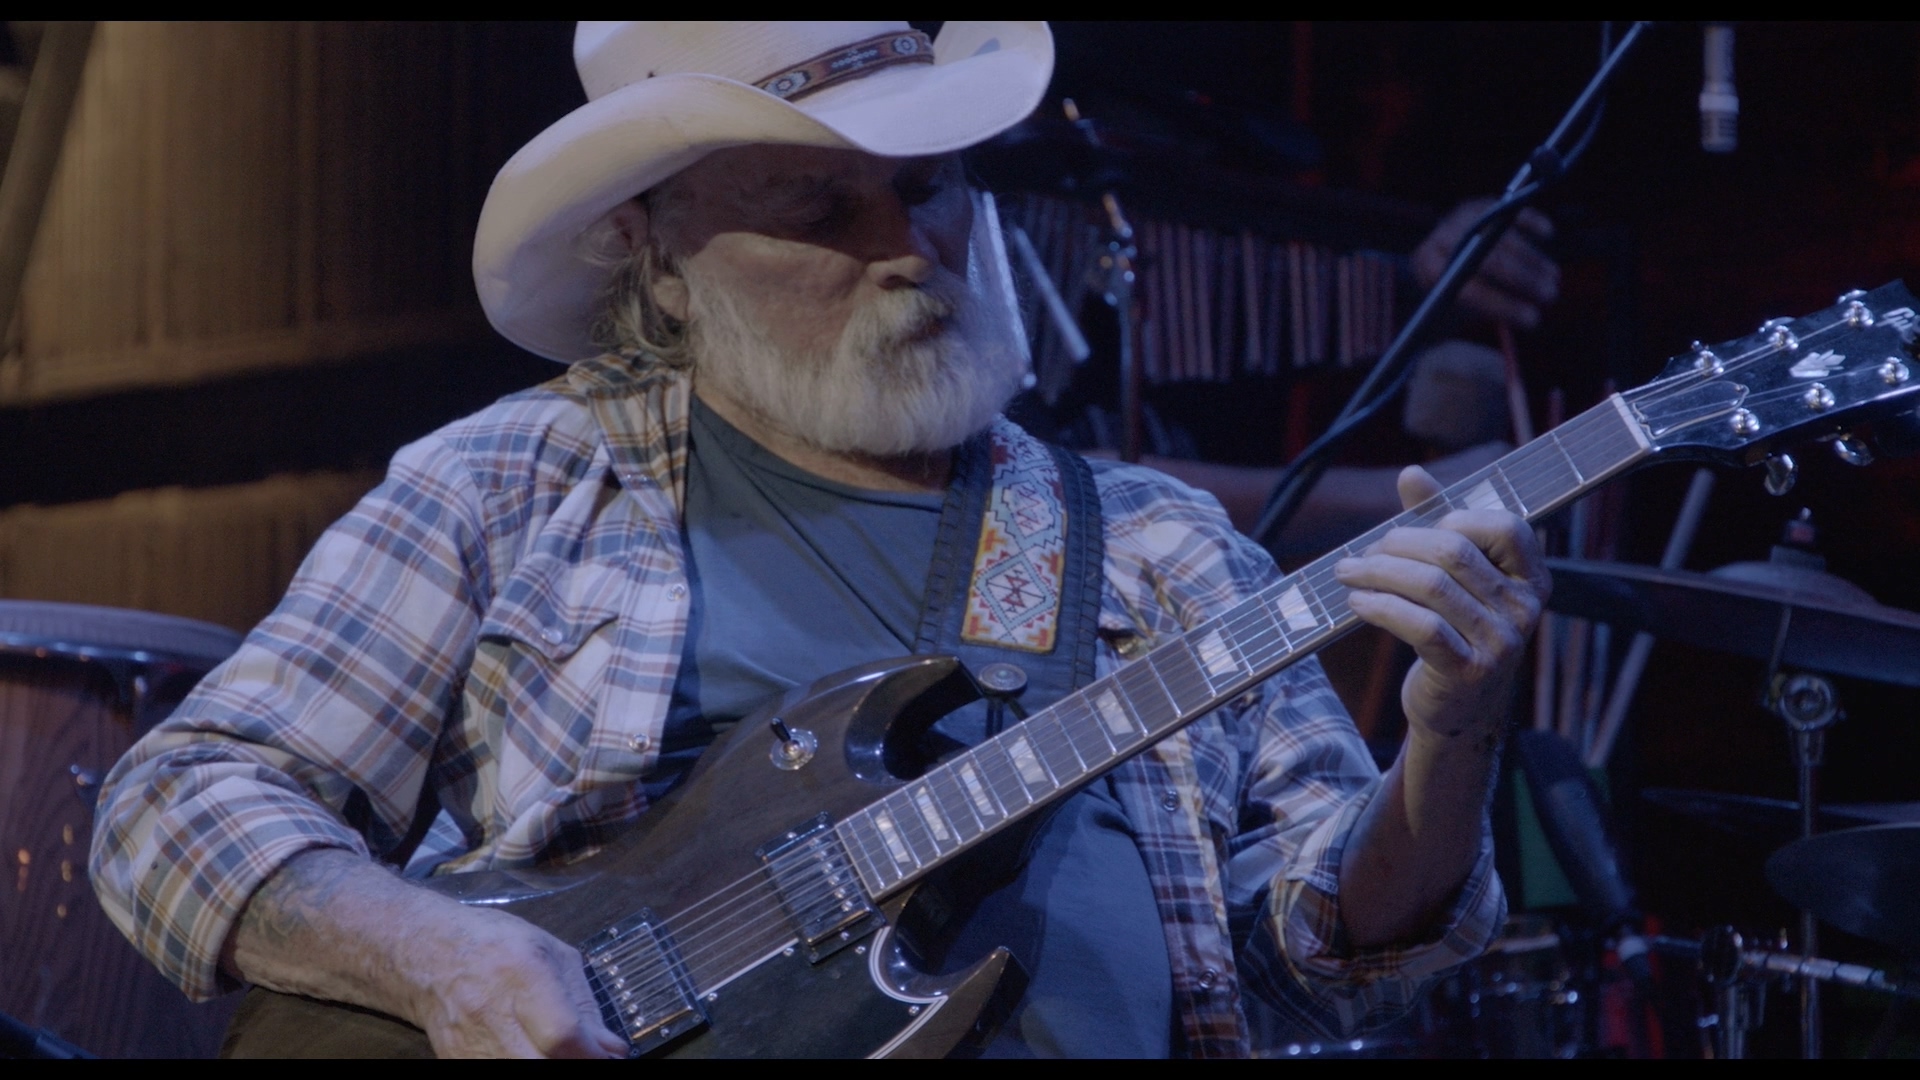 The Dickey Betts Band - Ramblin' Man - Live At The St. George Theatre BD (2019)_20190811_110700.985.jpg